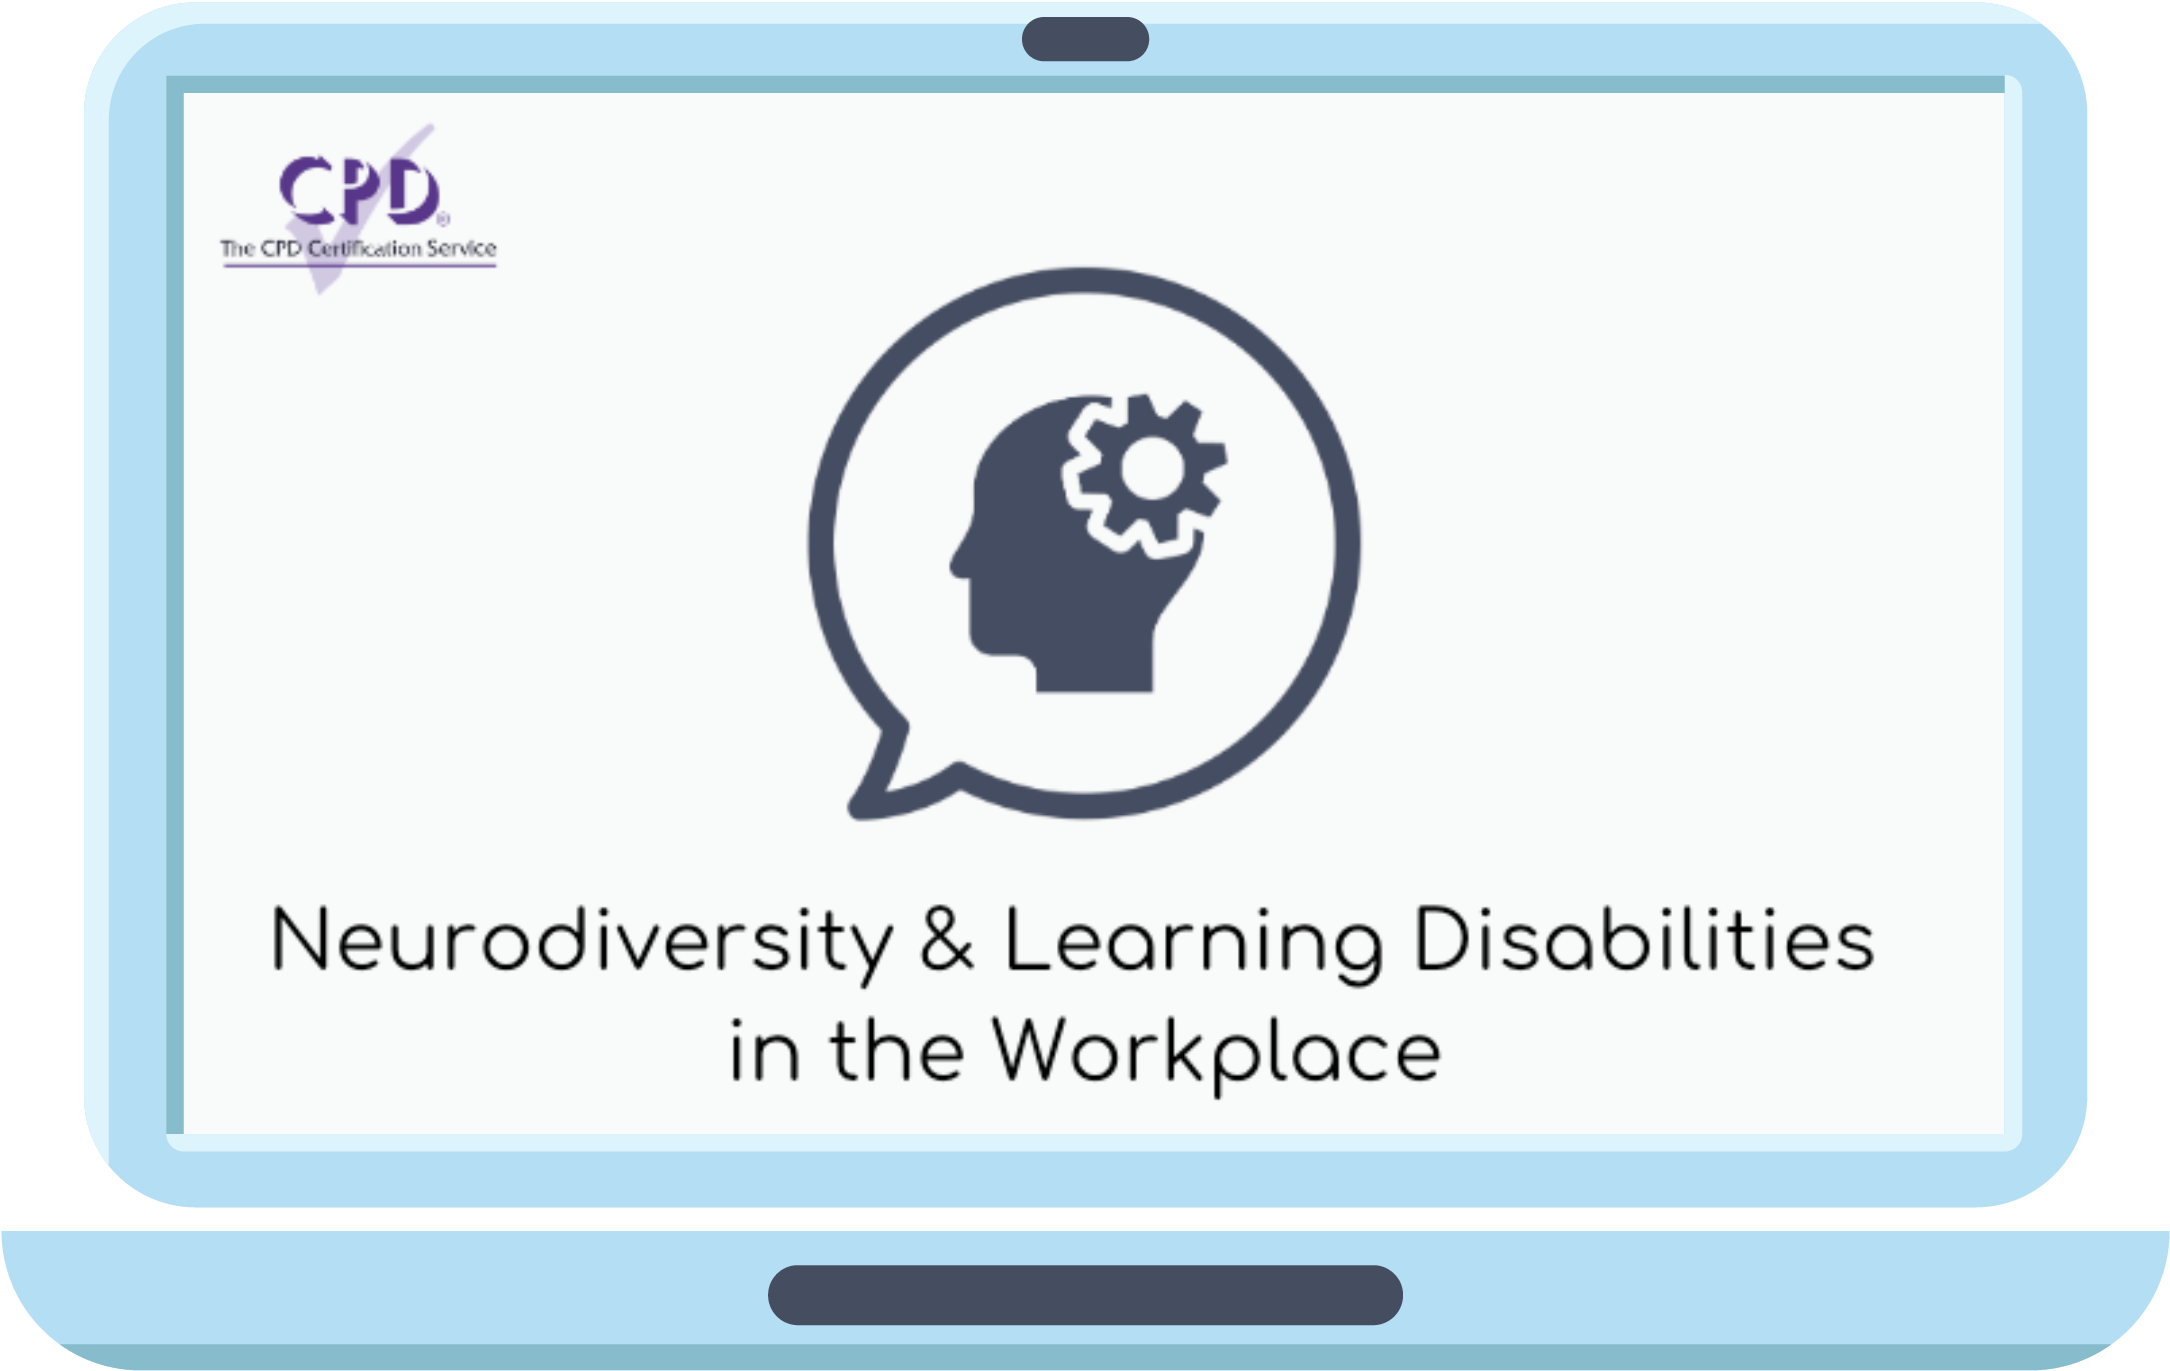 Neurodiversity & Learning Disabilities in the workplace - Video Training